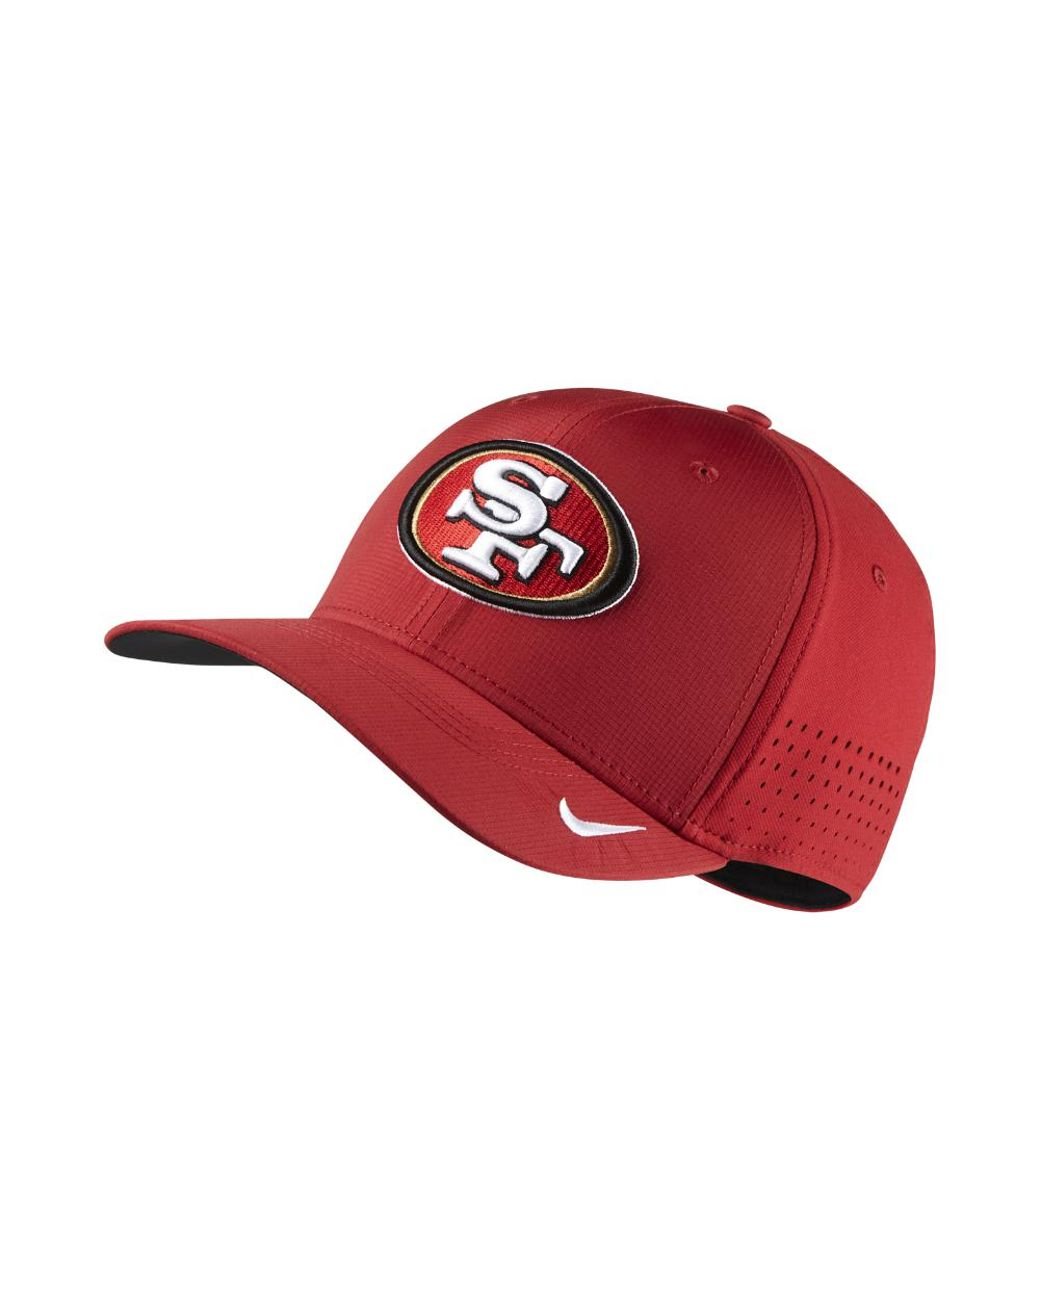 Nike Swoosh Flex (nfl 49ers) Fitted Hat in Red for Men